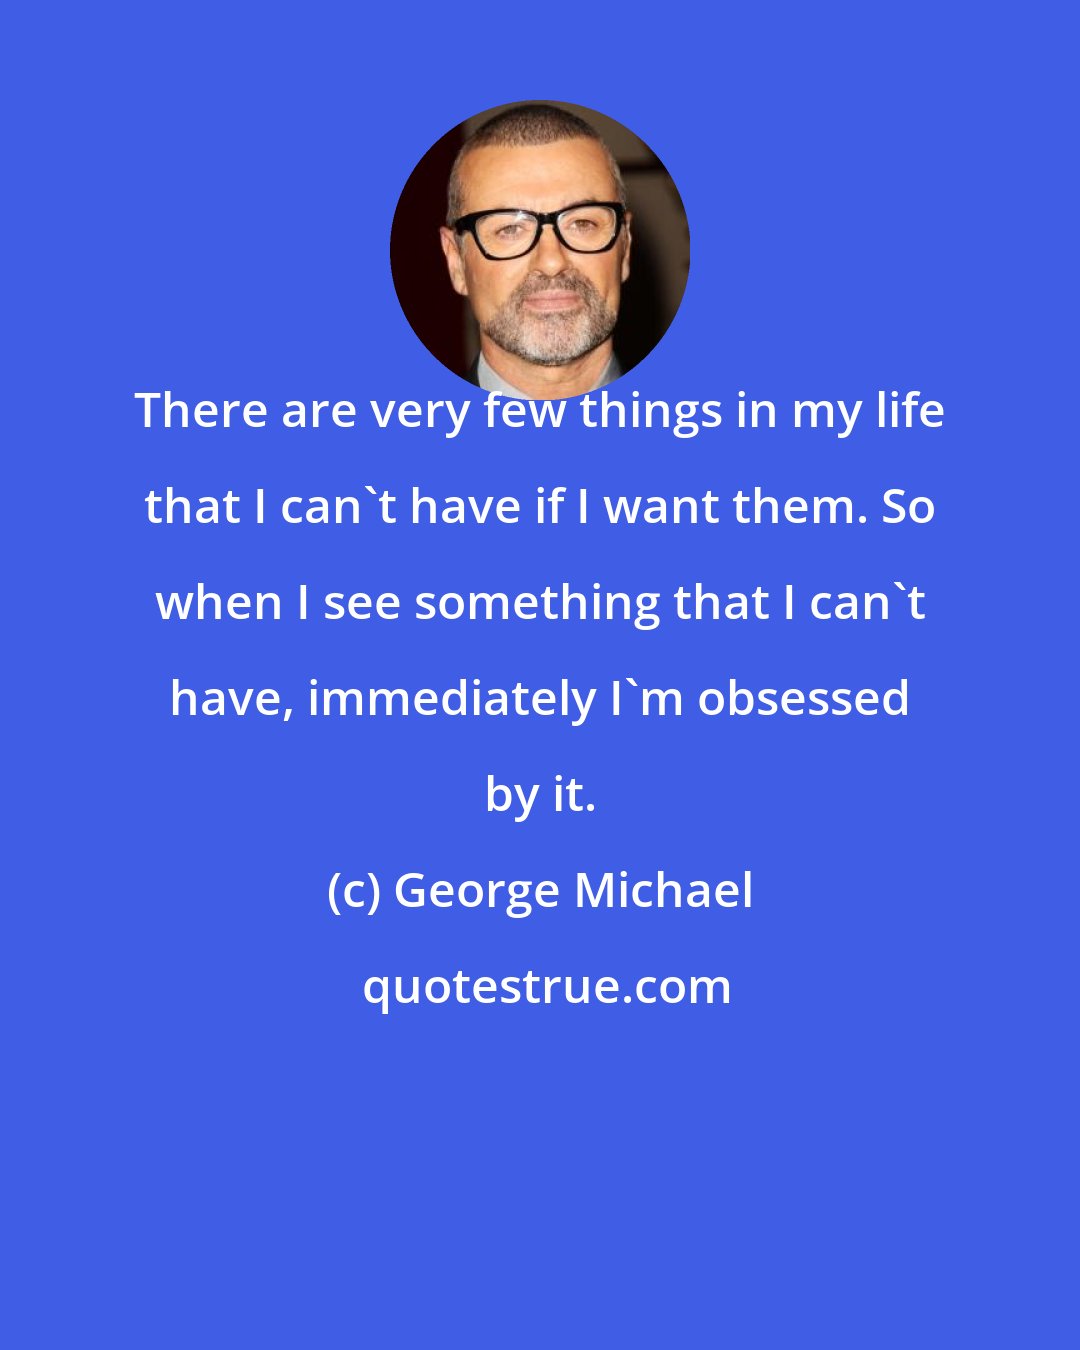 George Michael: There are very few things in my life that I can't have if I want them. So when I see something that I can't have, immediately I'm obsessed by it.